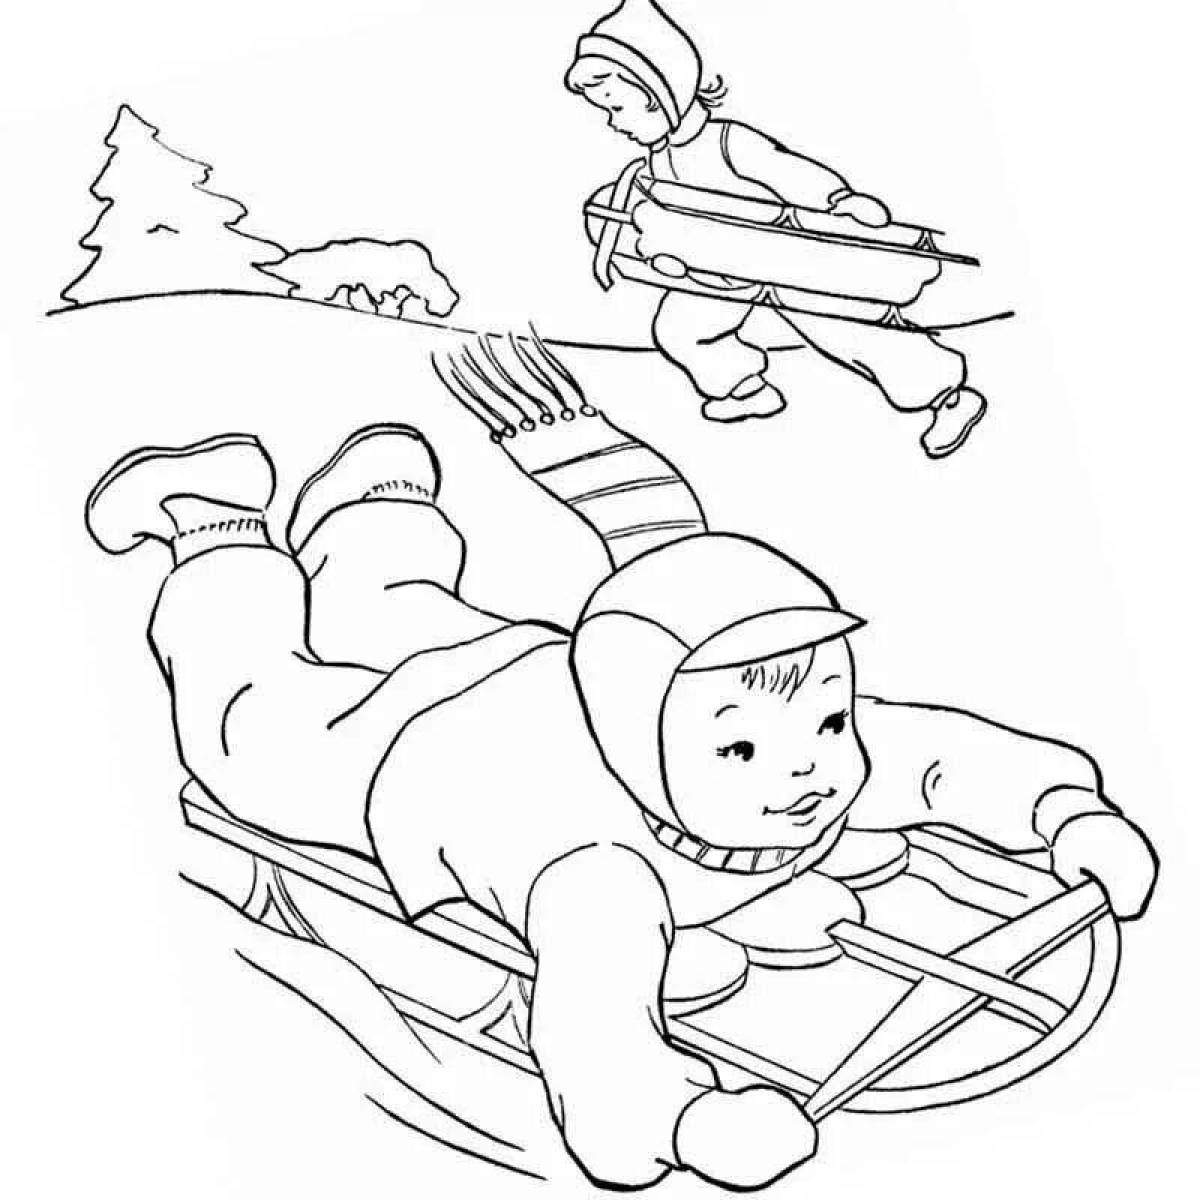 Coloring page excited child on sled